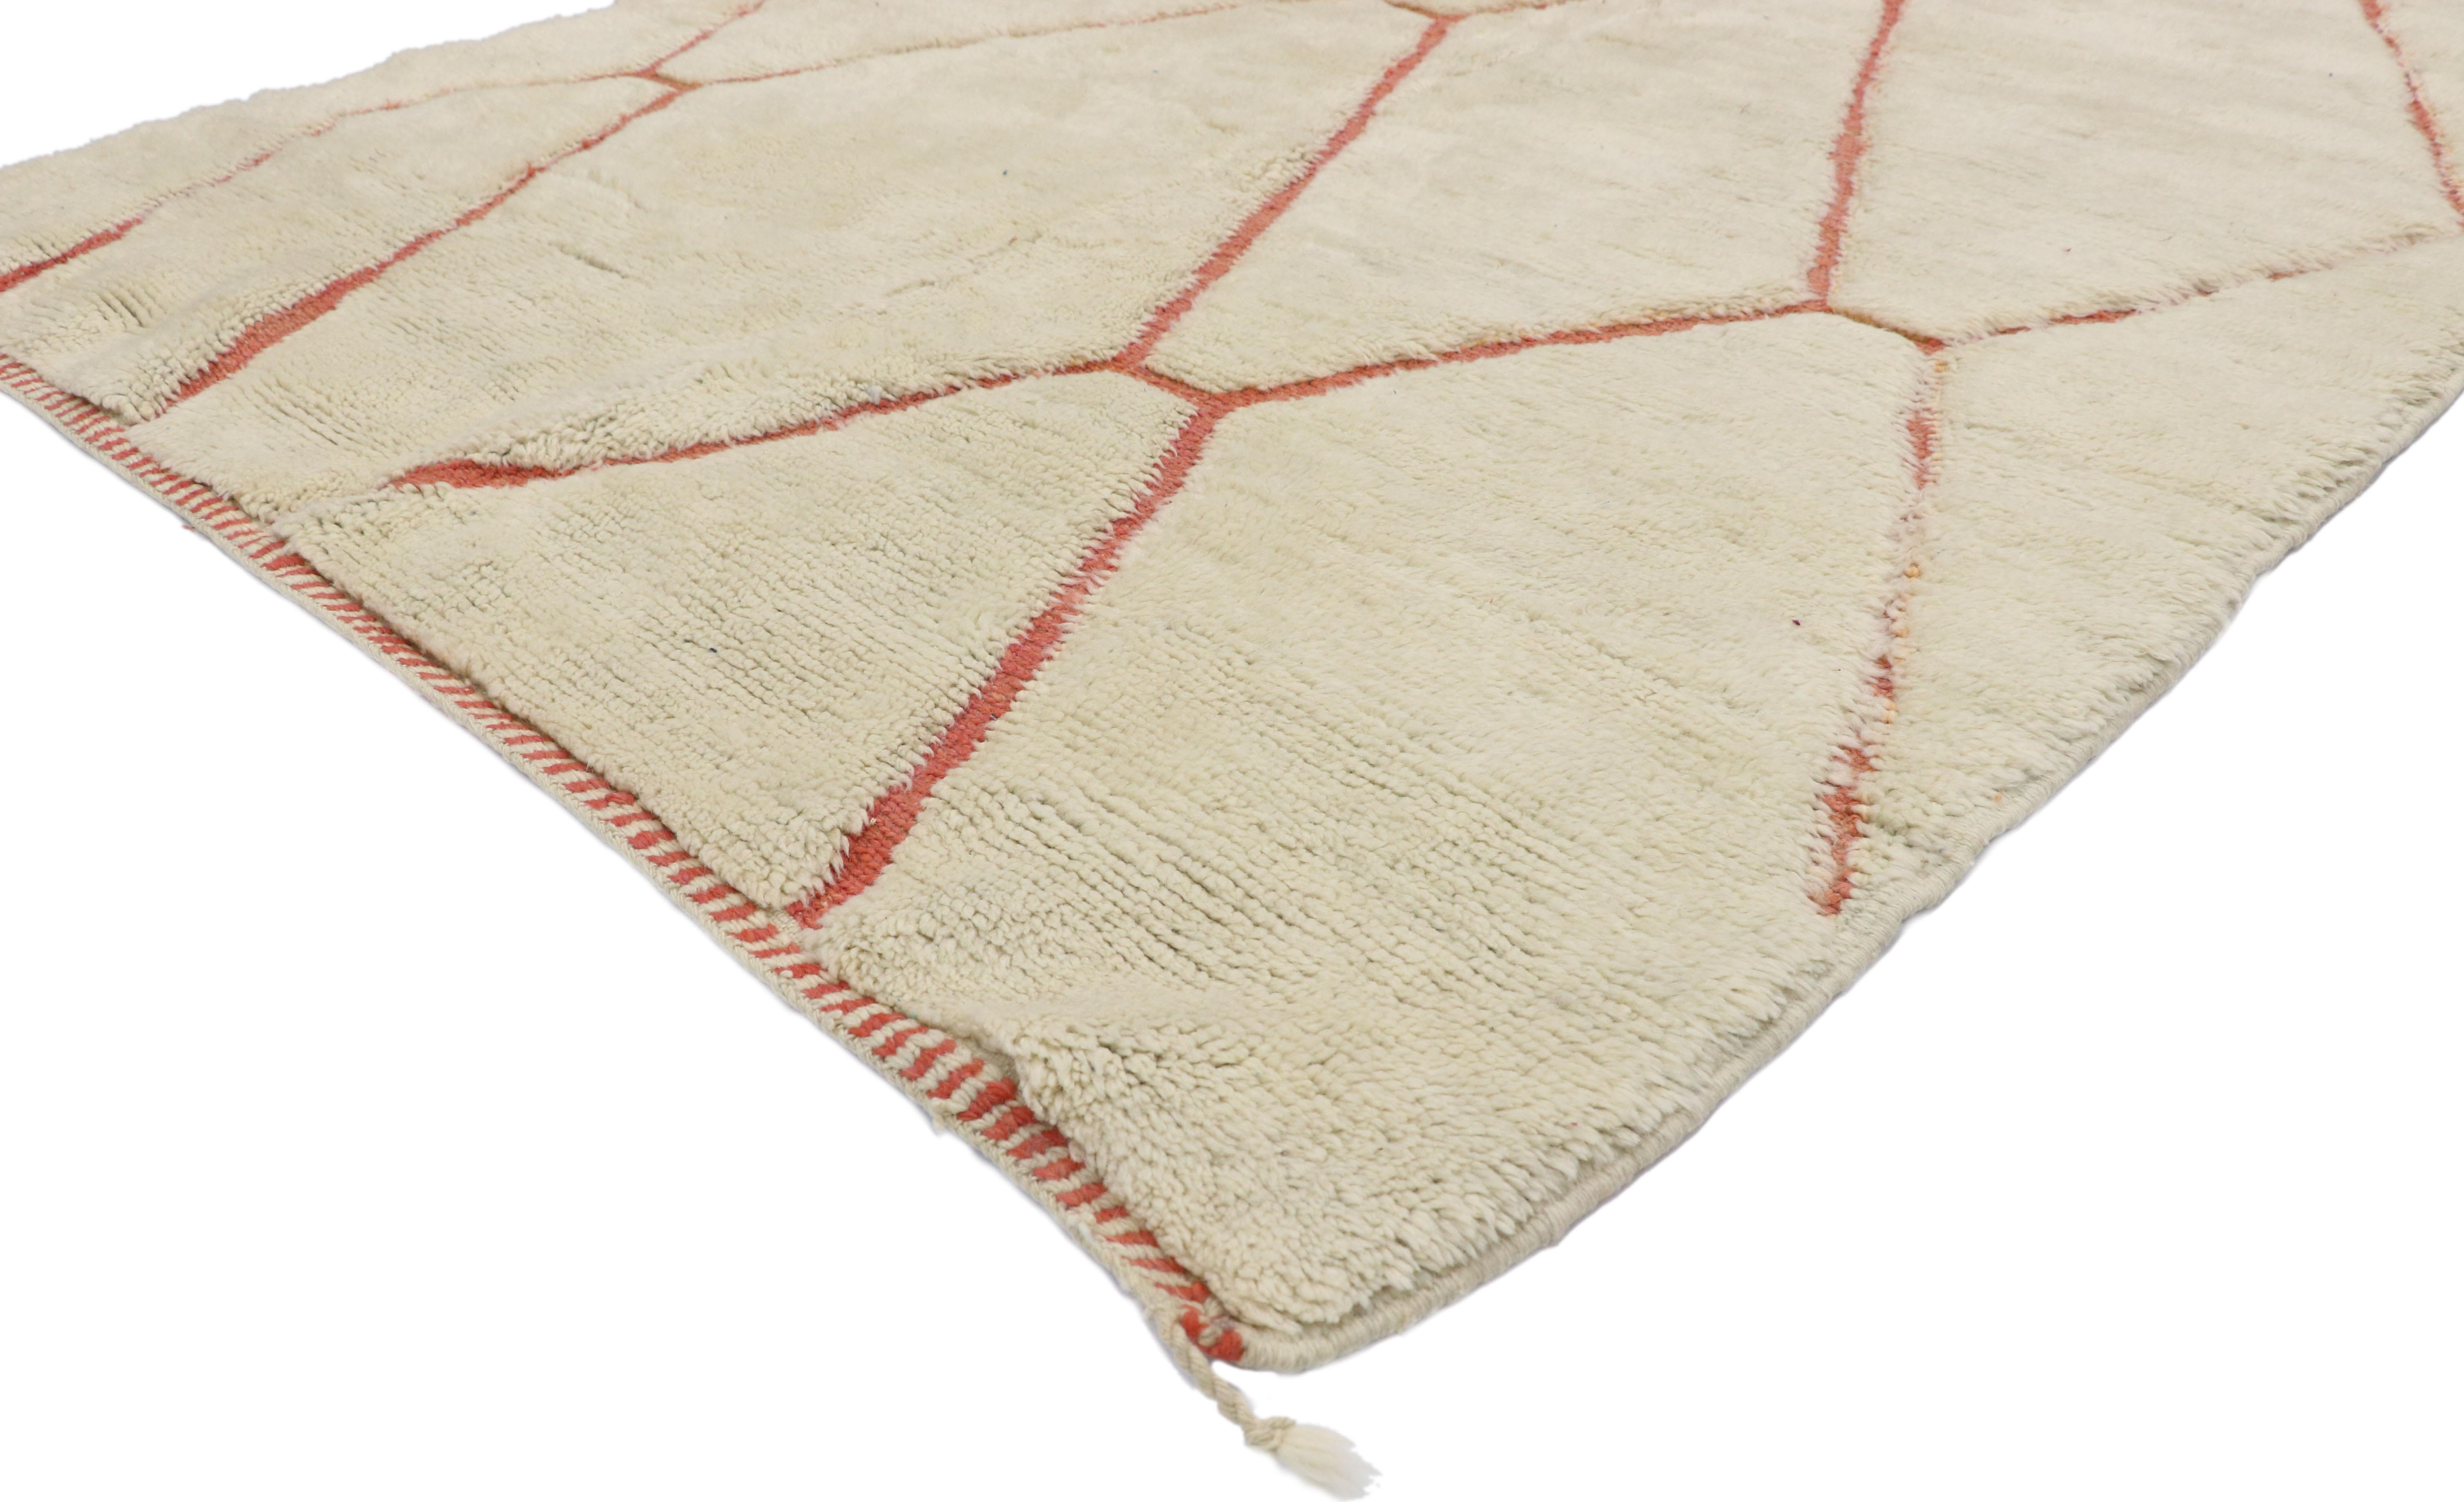 21035 New Contemporary Berber Moroccan Rug with Cozy Hygge Vibes and Organic Modern Style 05'05 x 07'02. This hand knotted wool contemporary Moroccan area rug features contrasting soft red colored lines running the length of the abrashed cream